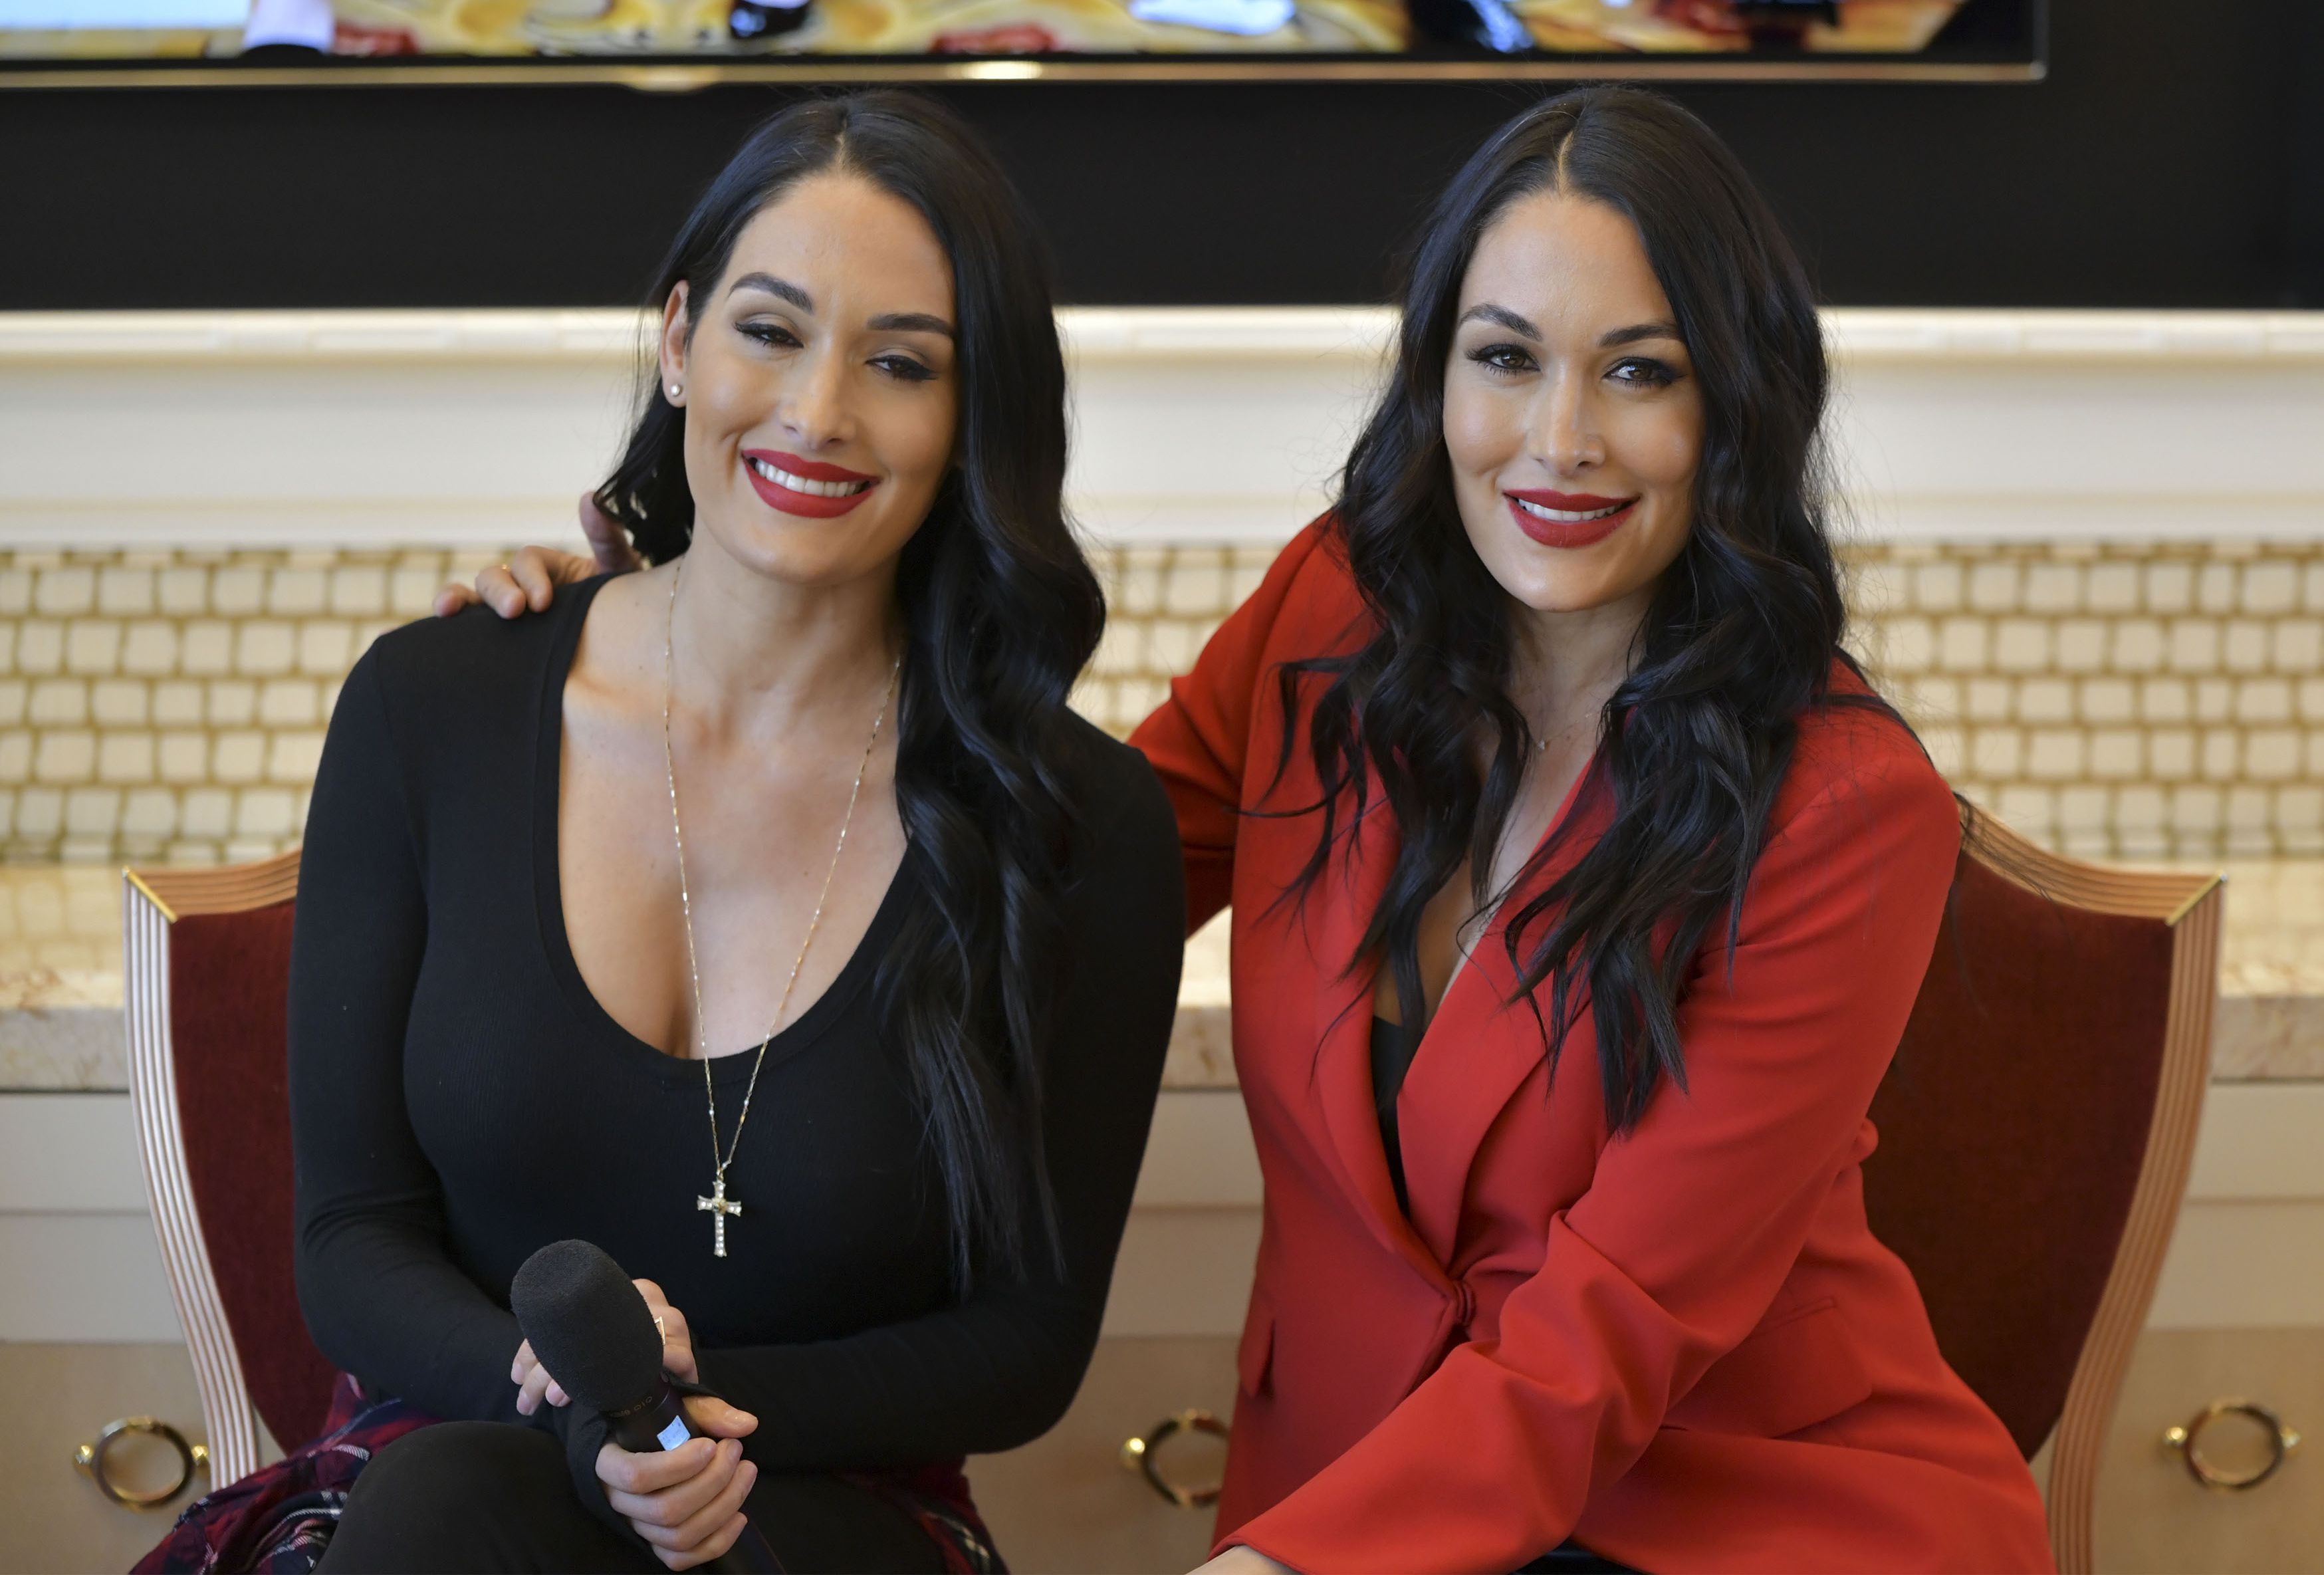 Where Do the Bella Twins Live? Moved From Phoenix to Napa Valley